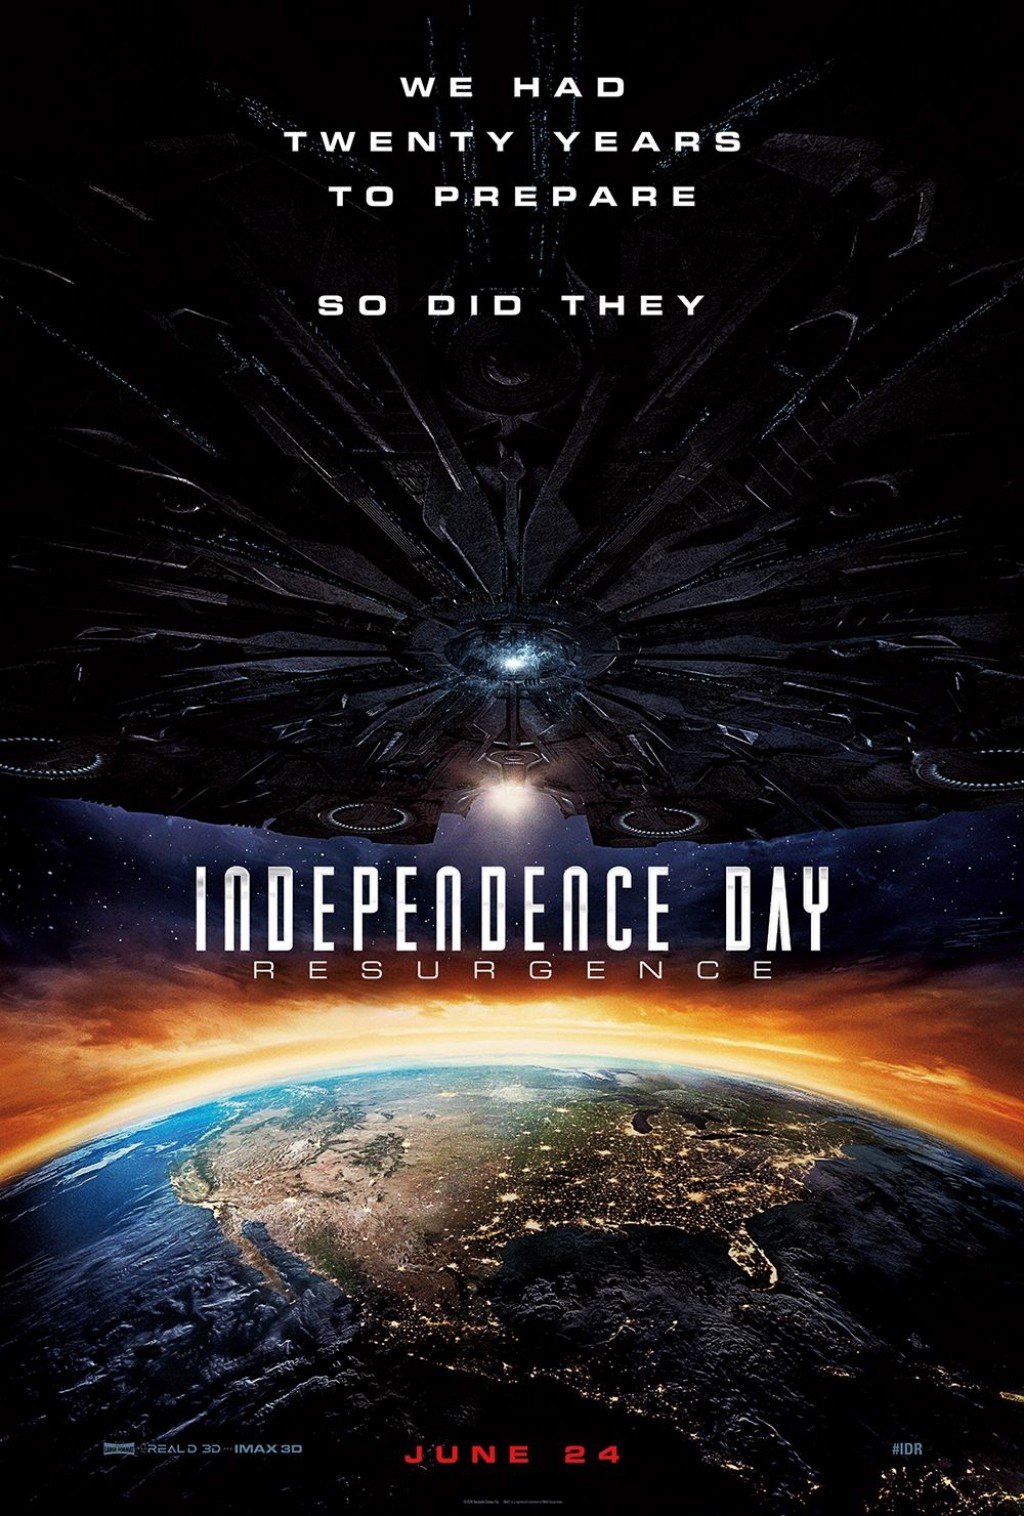 independence day resurgence download dublado